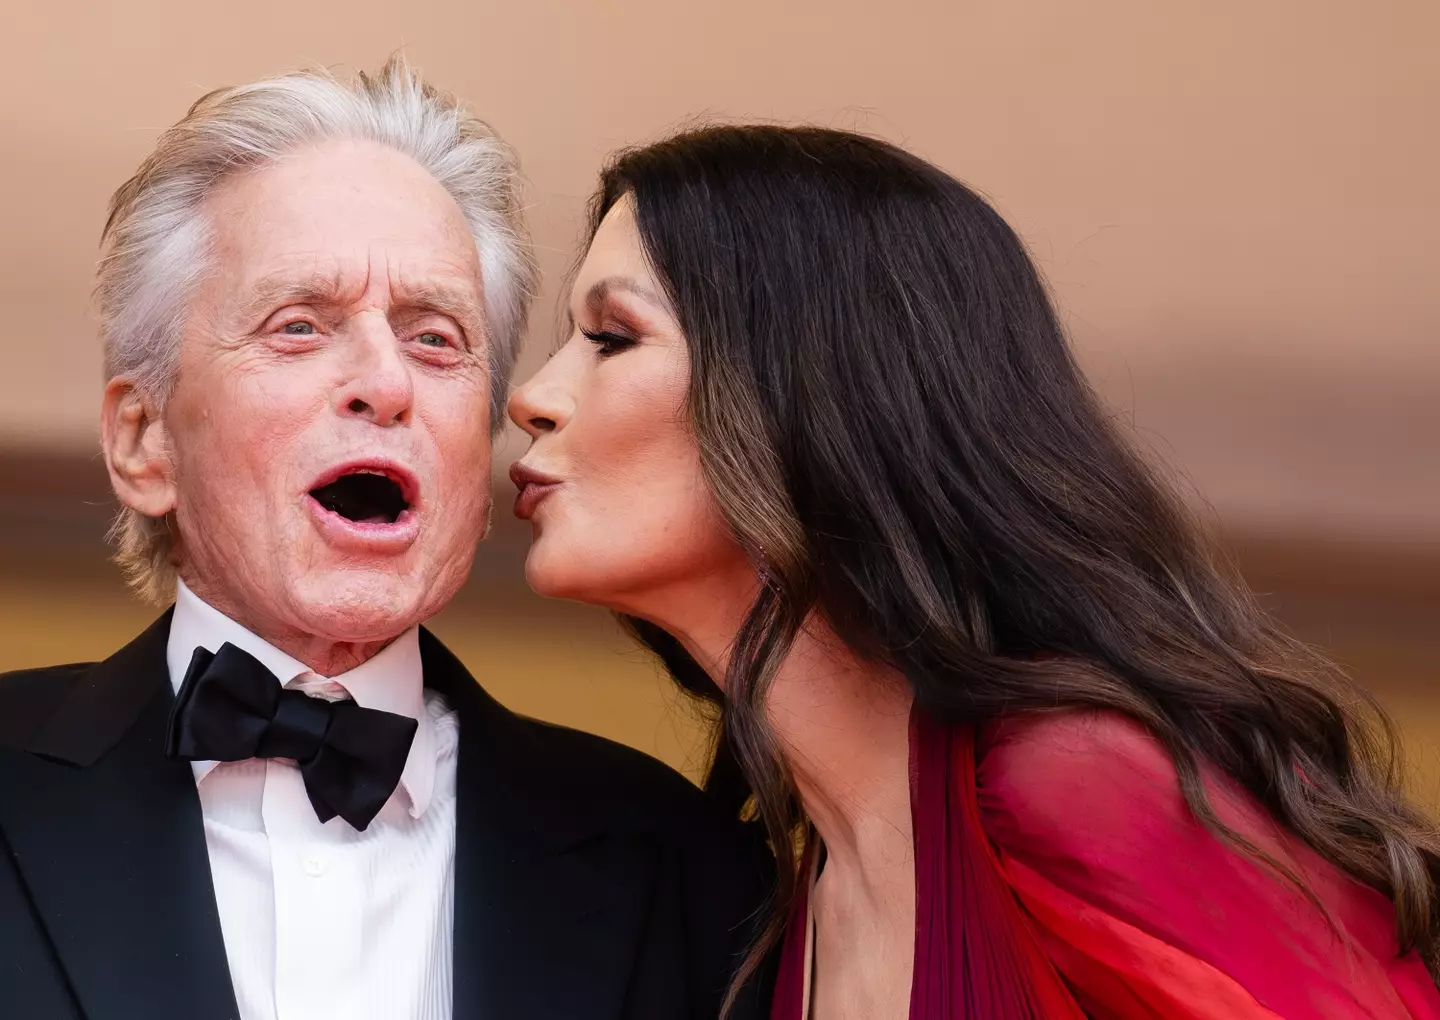 Michael Douglas and Catherine Zeta-Jones are more in love than ever, despite being 25 years apart.